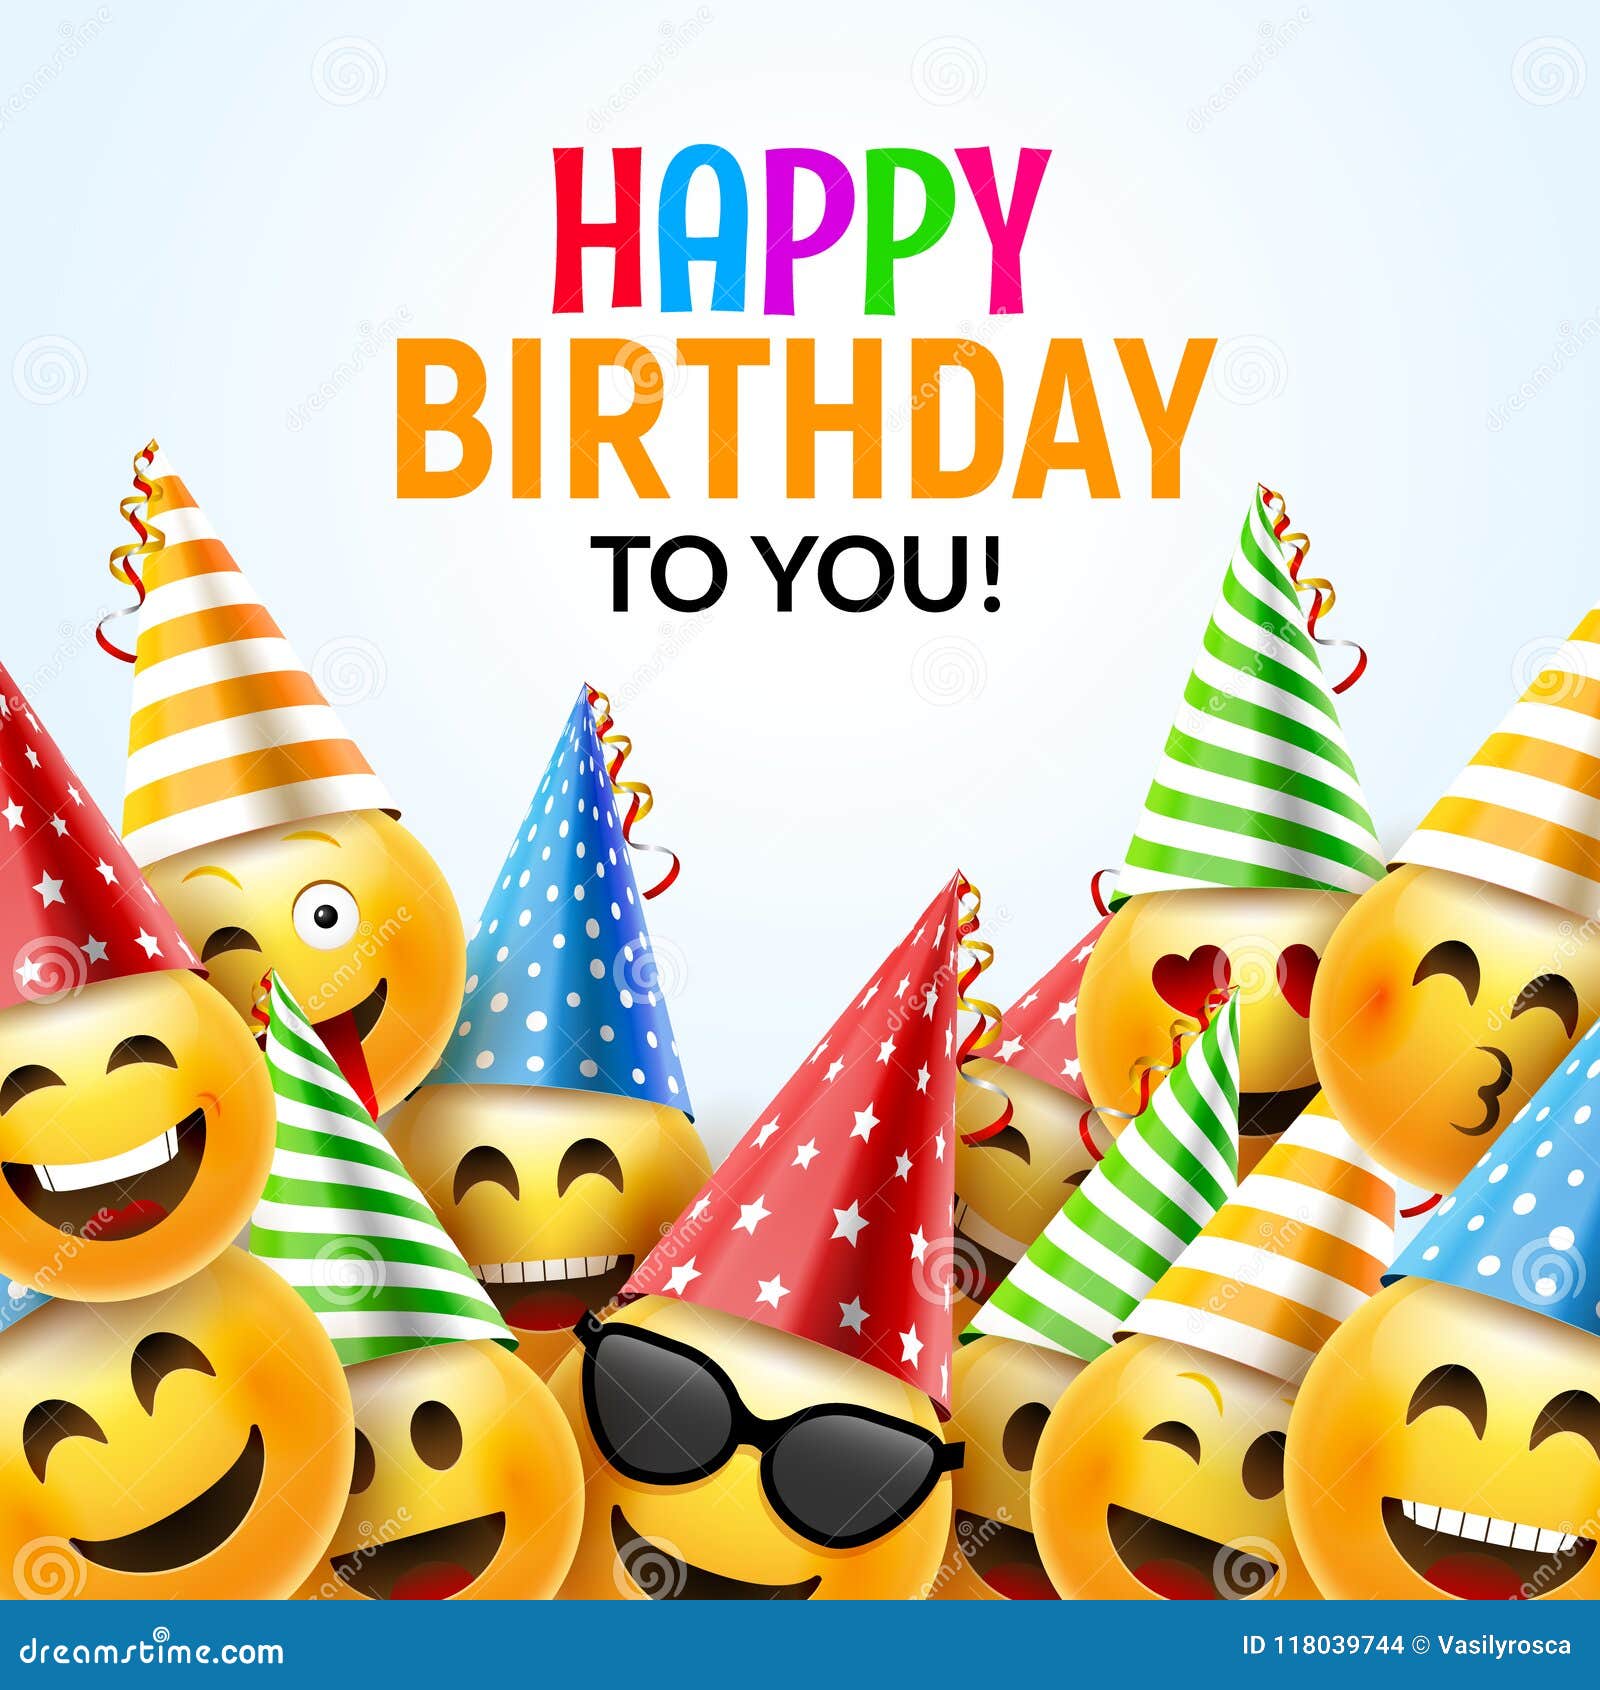 Download Birthday Happy Smile Greeting Card. Vector Birthday Background 3d Colorful Character Design ...